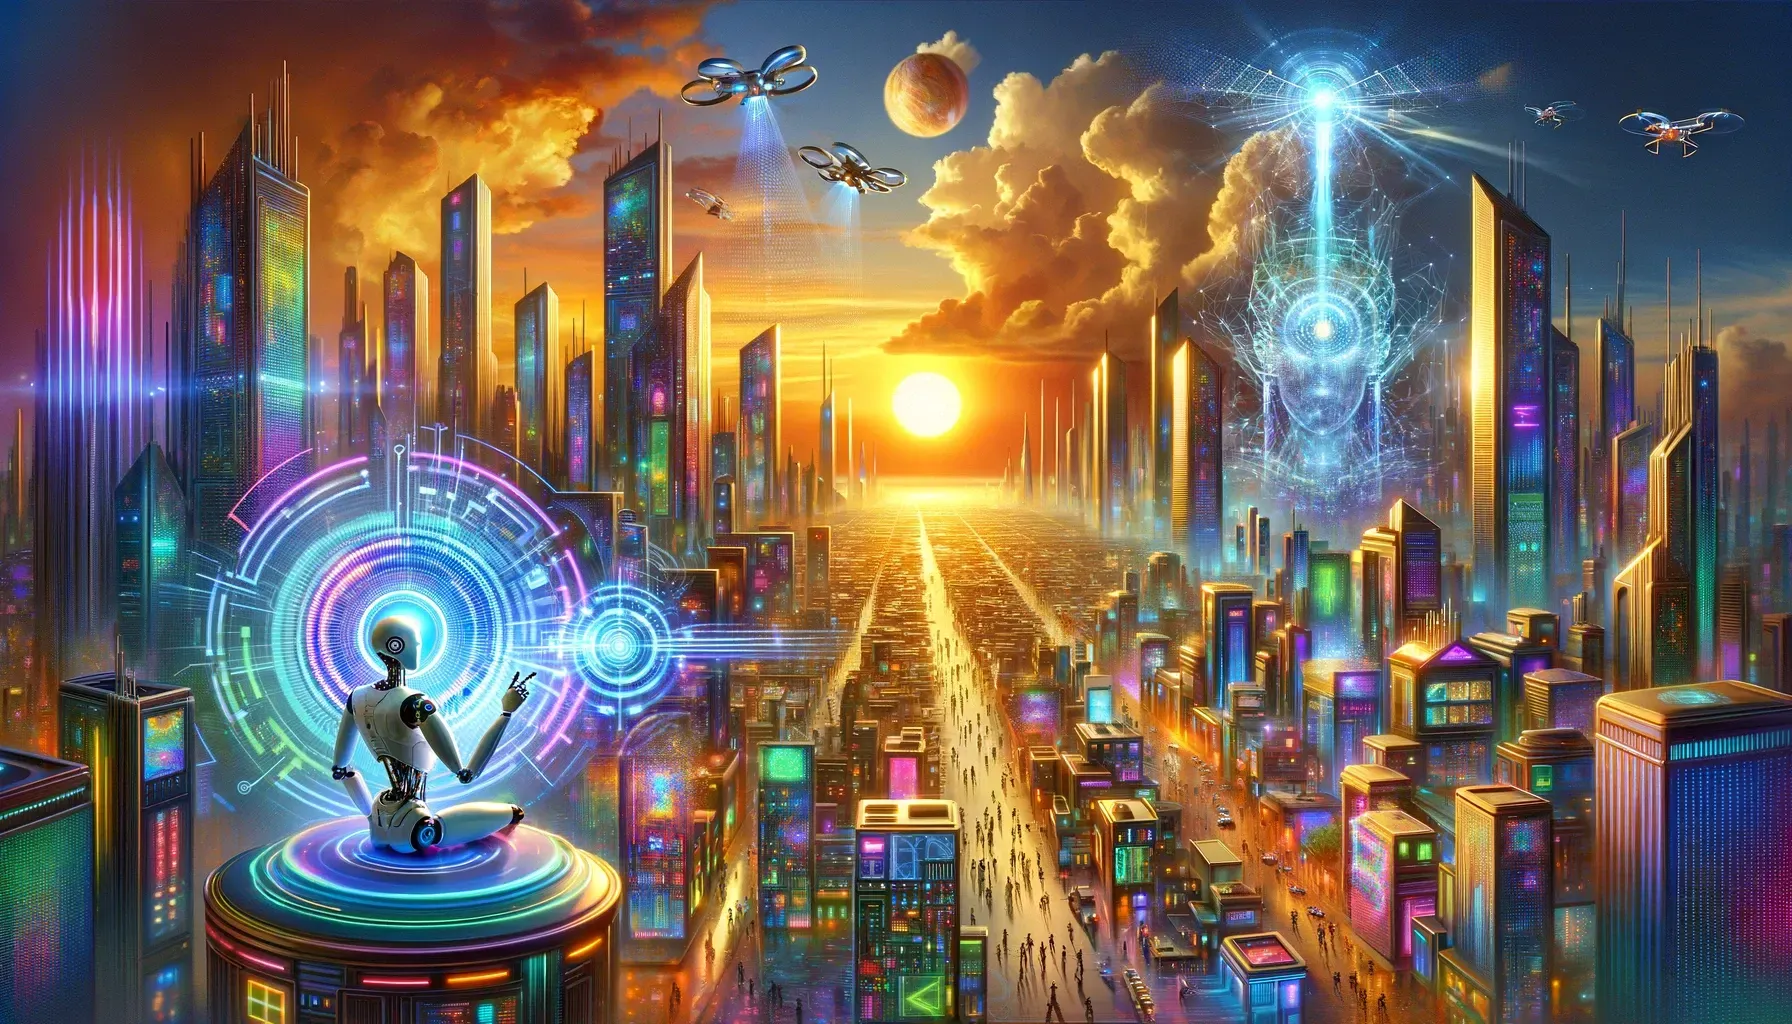 dalle 2024 02 14 201034 envision a vivid and dynamic scene where artificial intelligence has taken over the world the image should be filled with bright colors illustrating